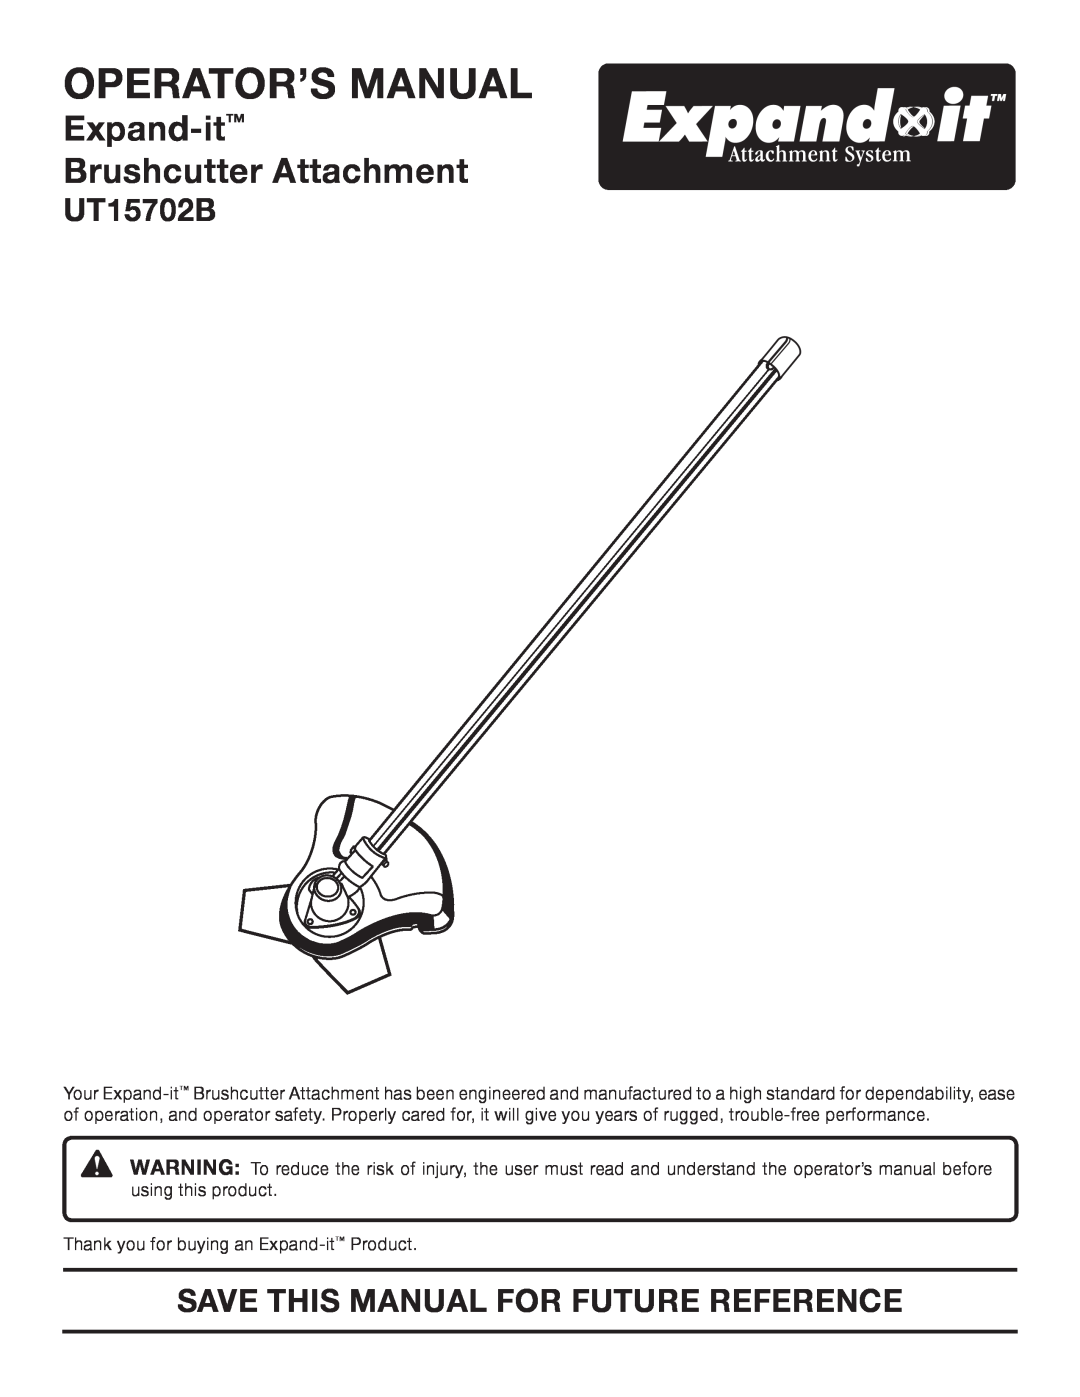 Ryobi UT15702B manual Operator’S Manual, Expand-it Brushcutter Attachment, Save This Manual For Future Reference 